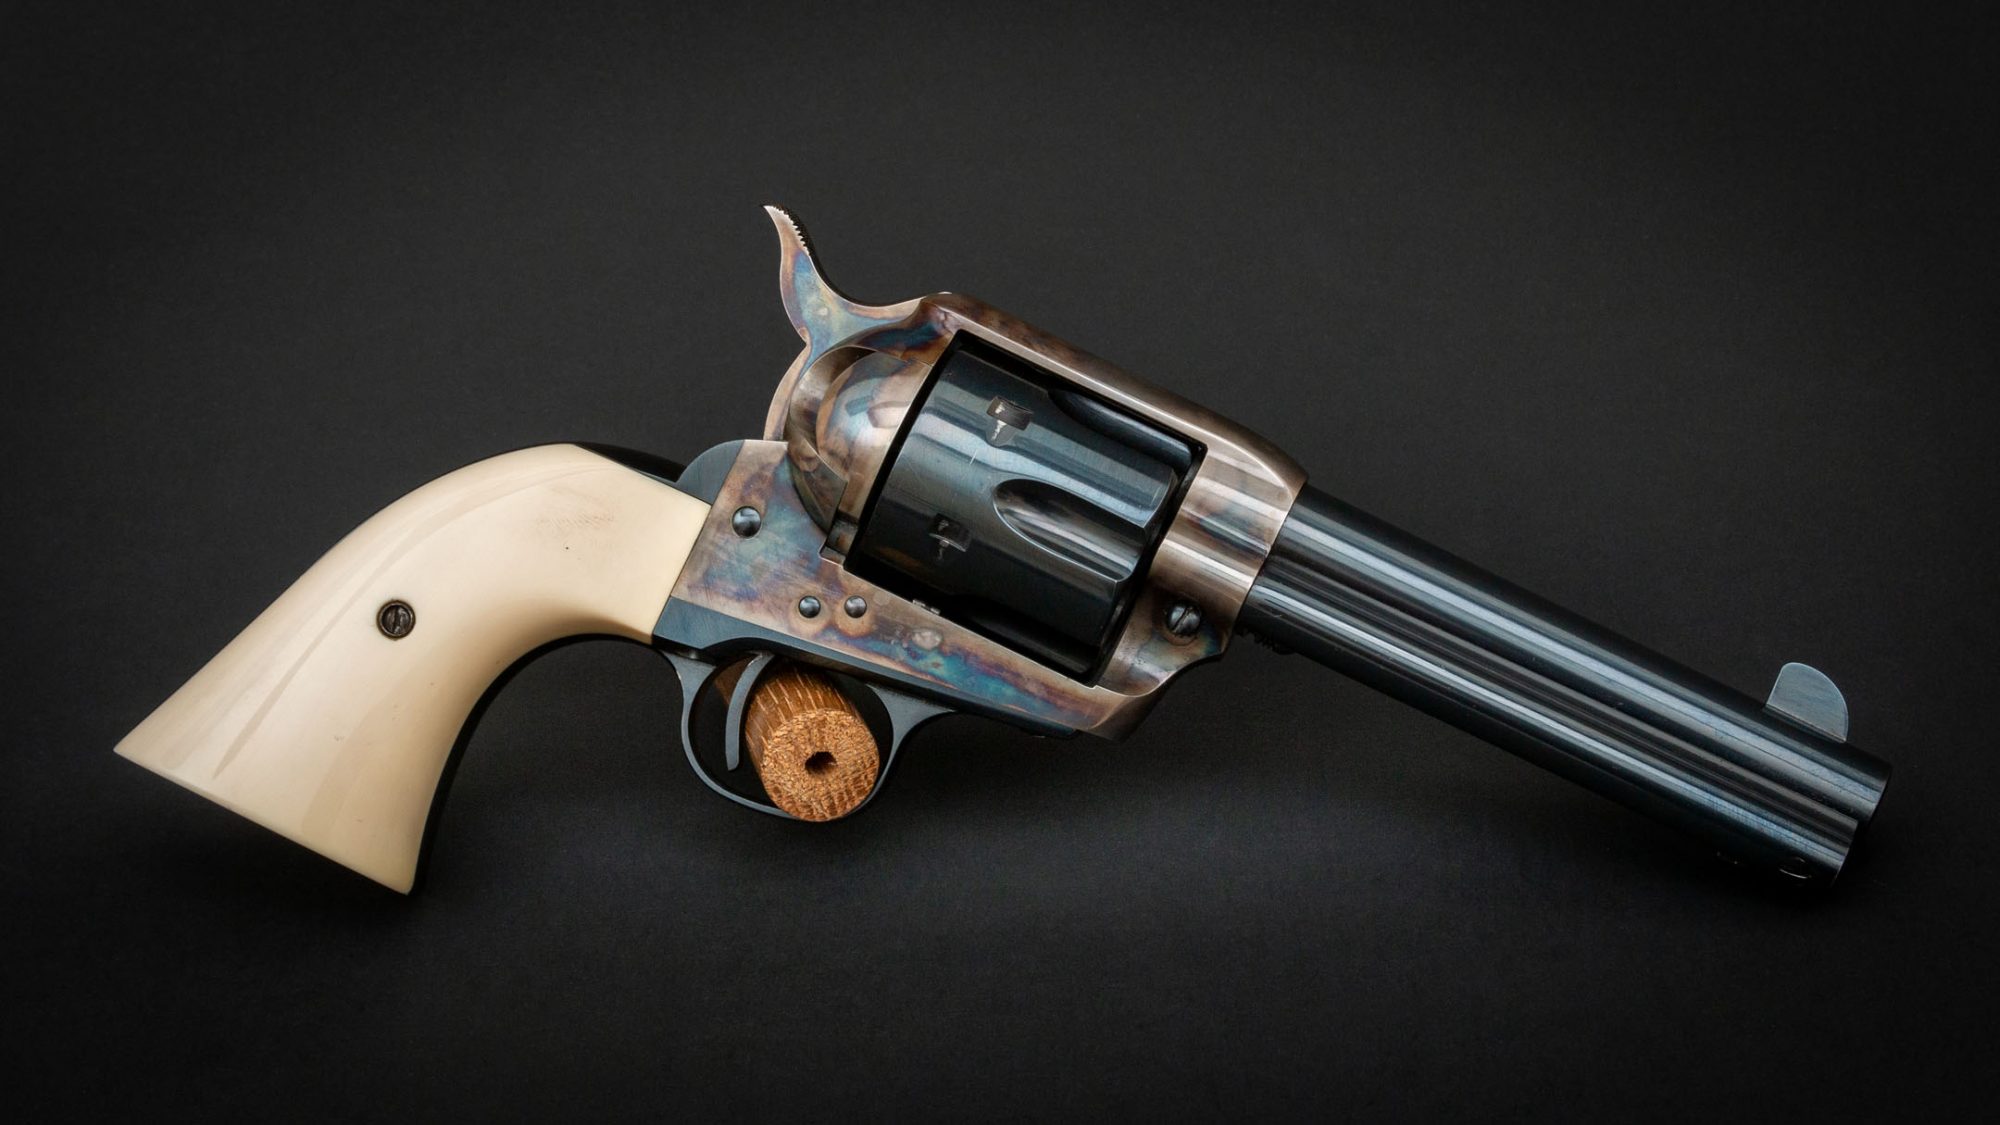 U.S. Fire Arms (USFA) Single Action Revolver in .44 Special, for sale by Turnbull Restoration of Bloomfield, NY